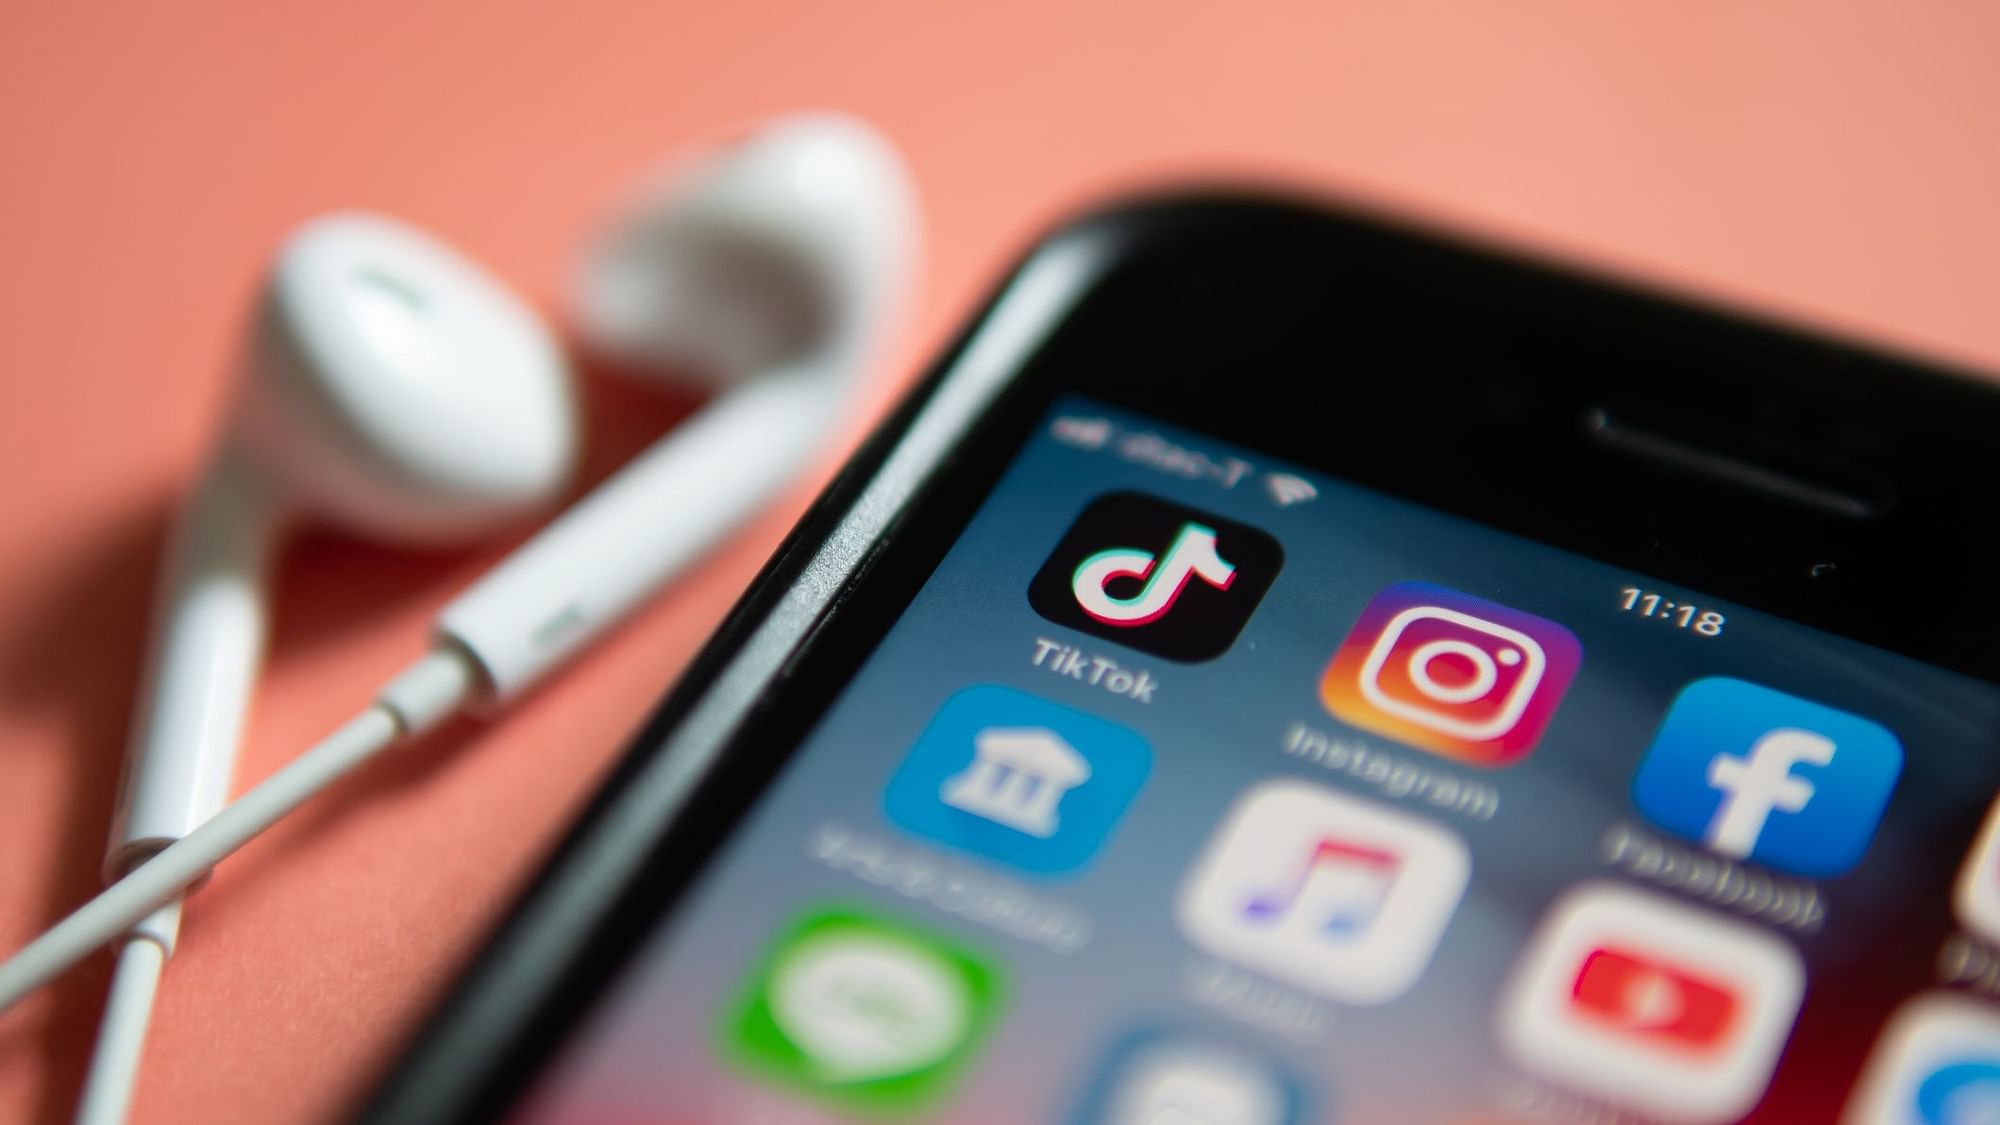 US President Donald Trump has decided to issue an order to ban TikTok in the US.